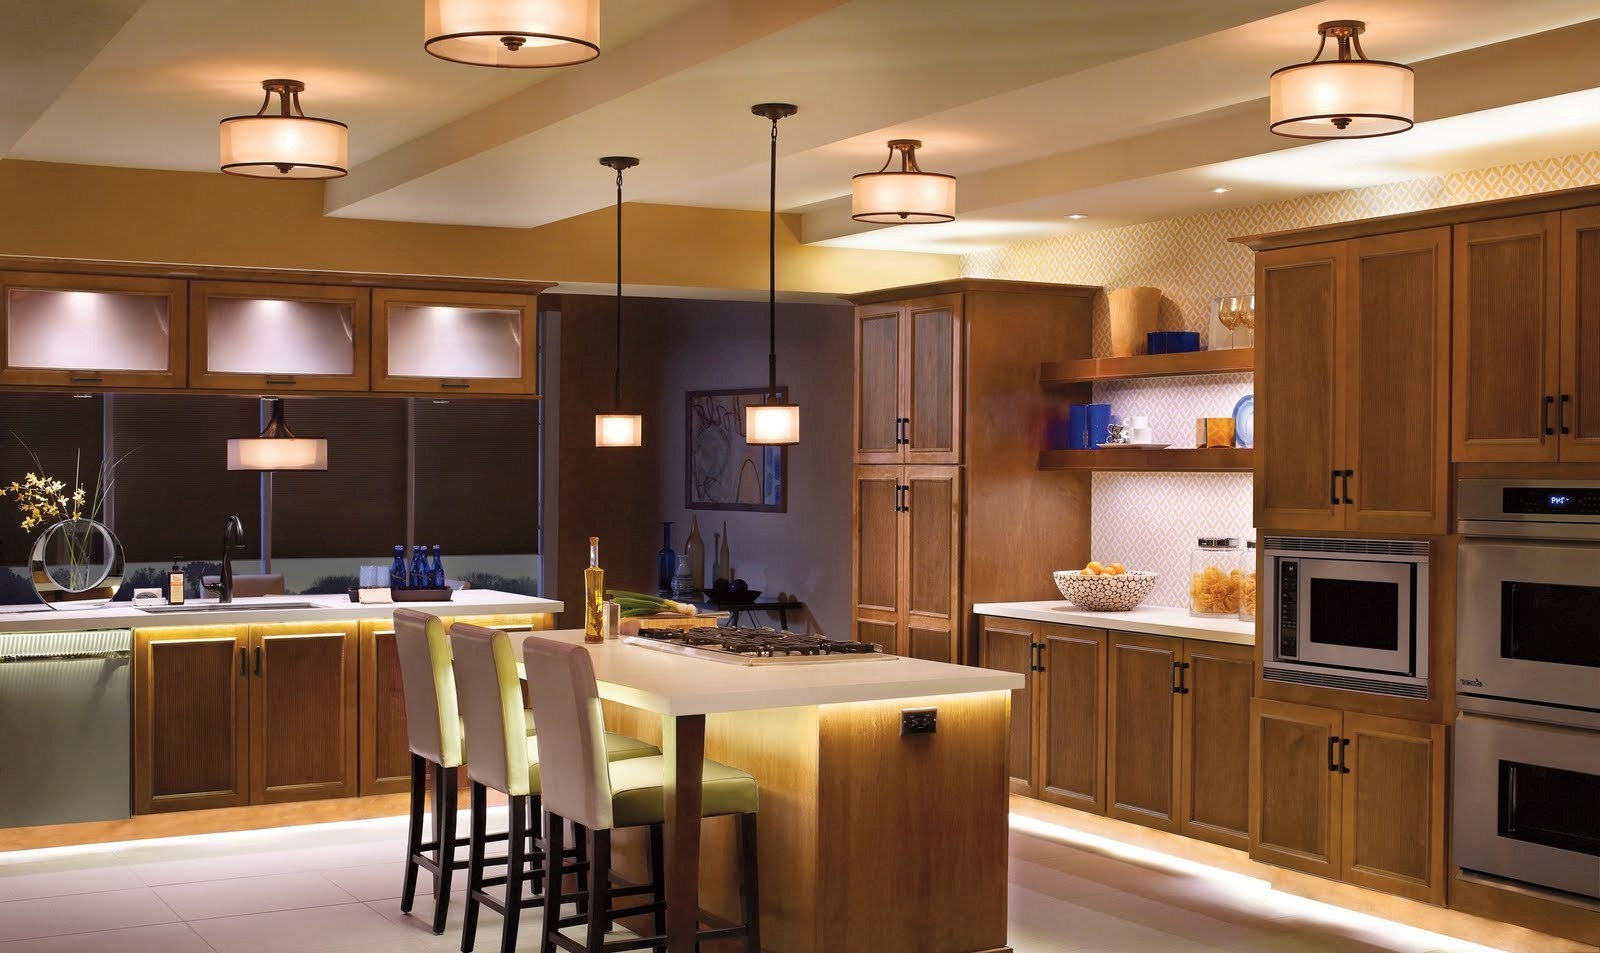 Permalink to Best Lighting For Low Kitchen Ceiling